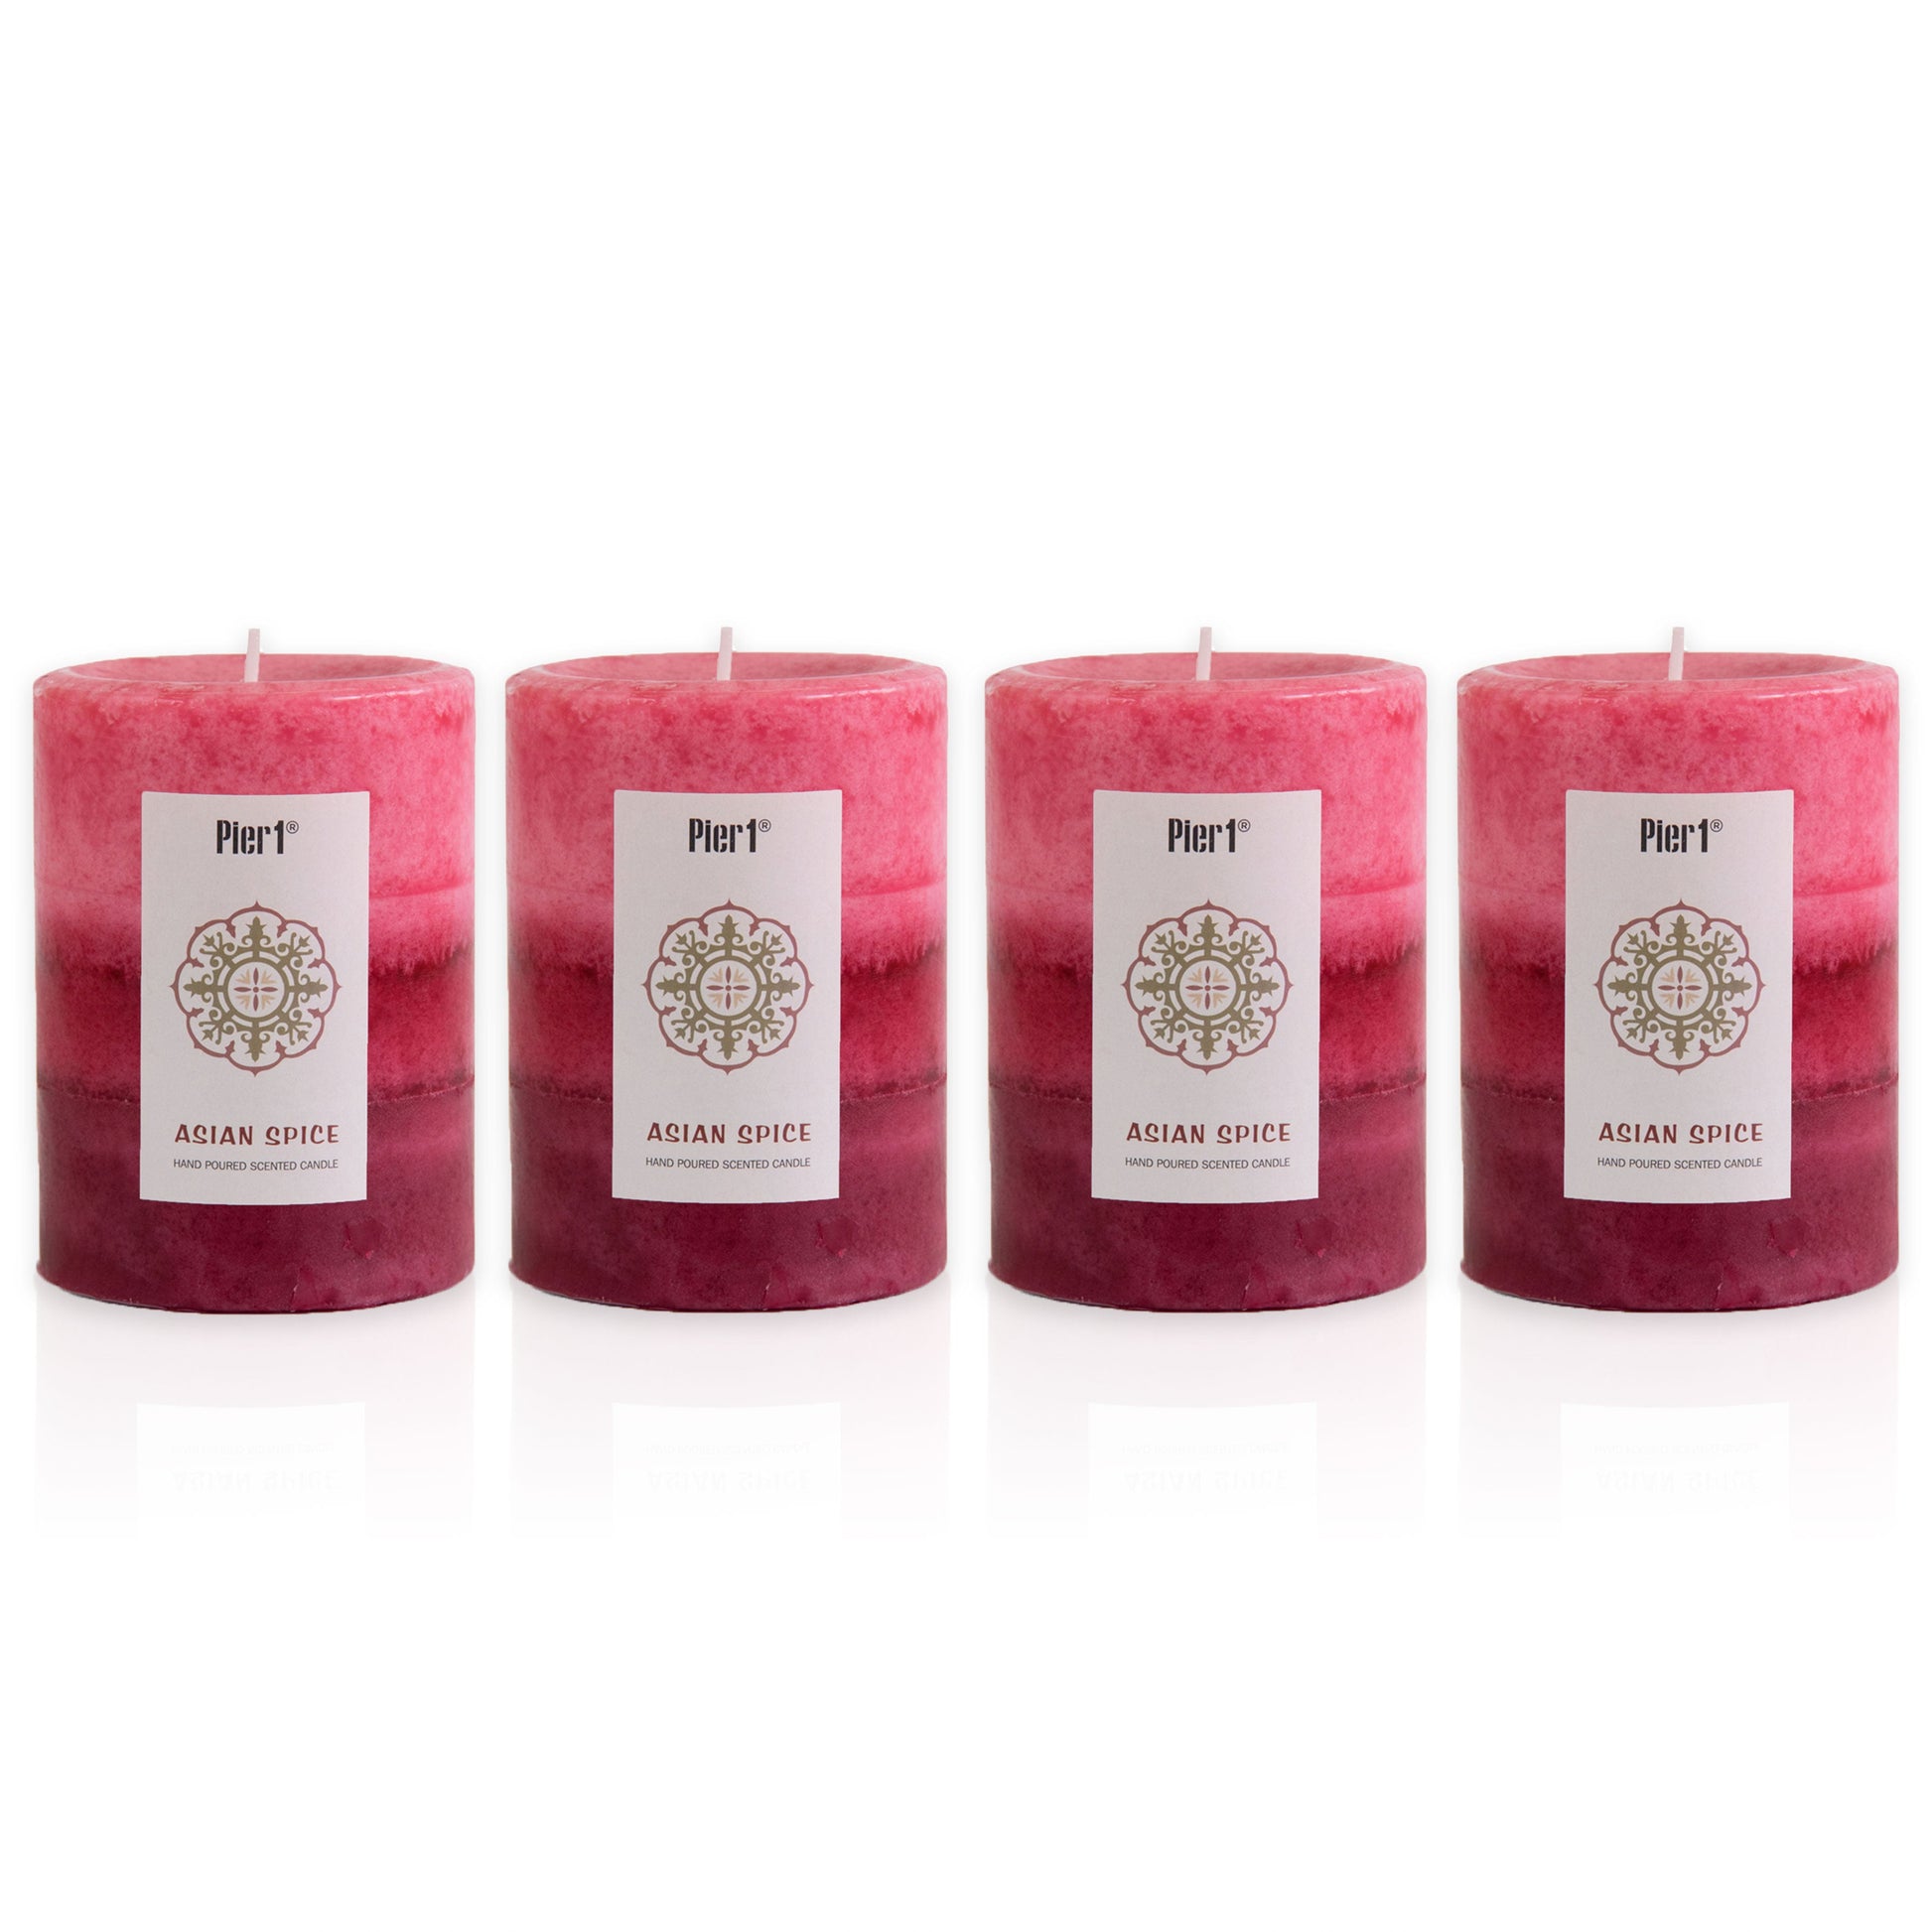 Pier 1 Asian Spice 3x4 Layered Set of 4 Pillar Candles - The Home Resolution